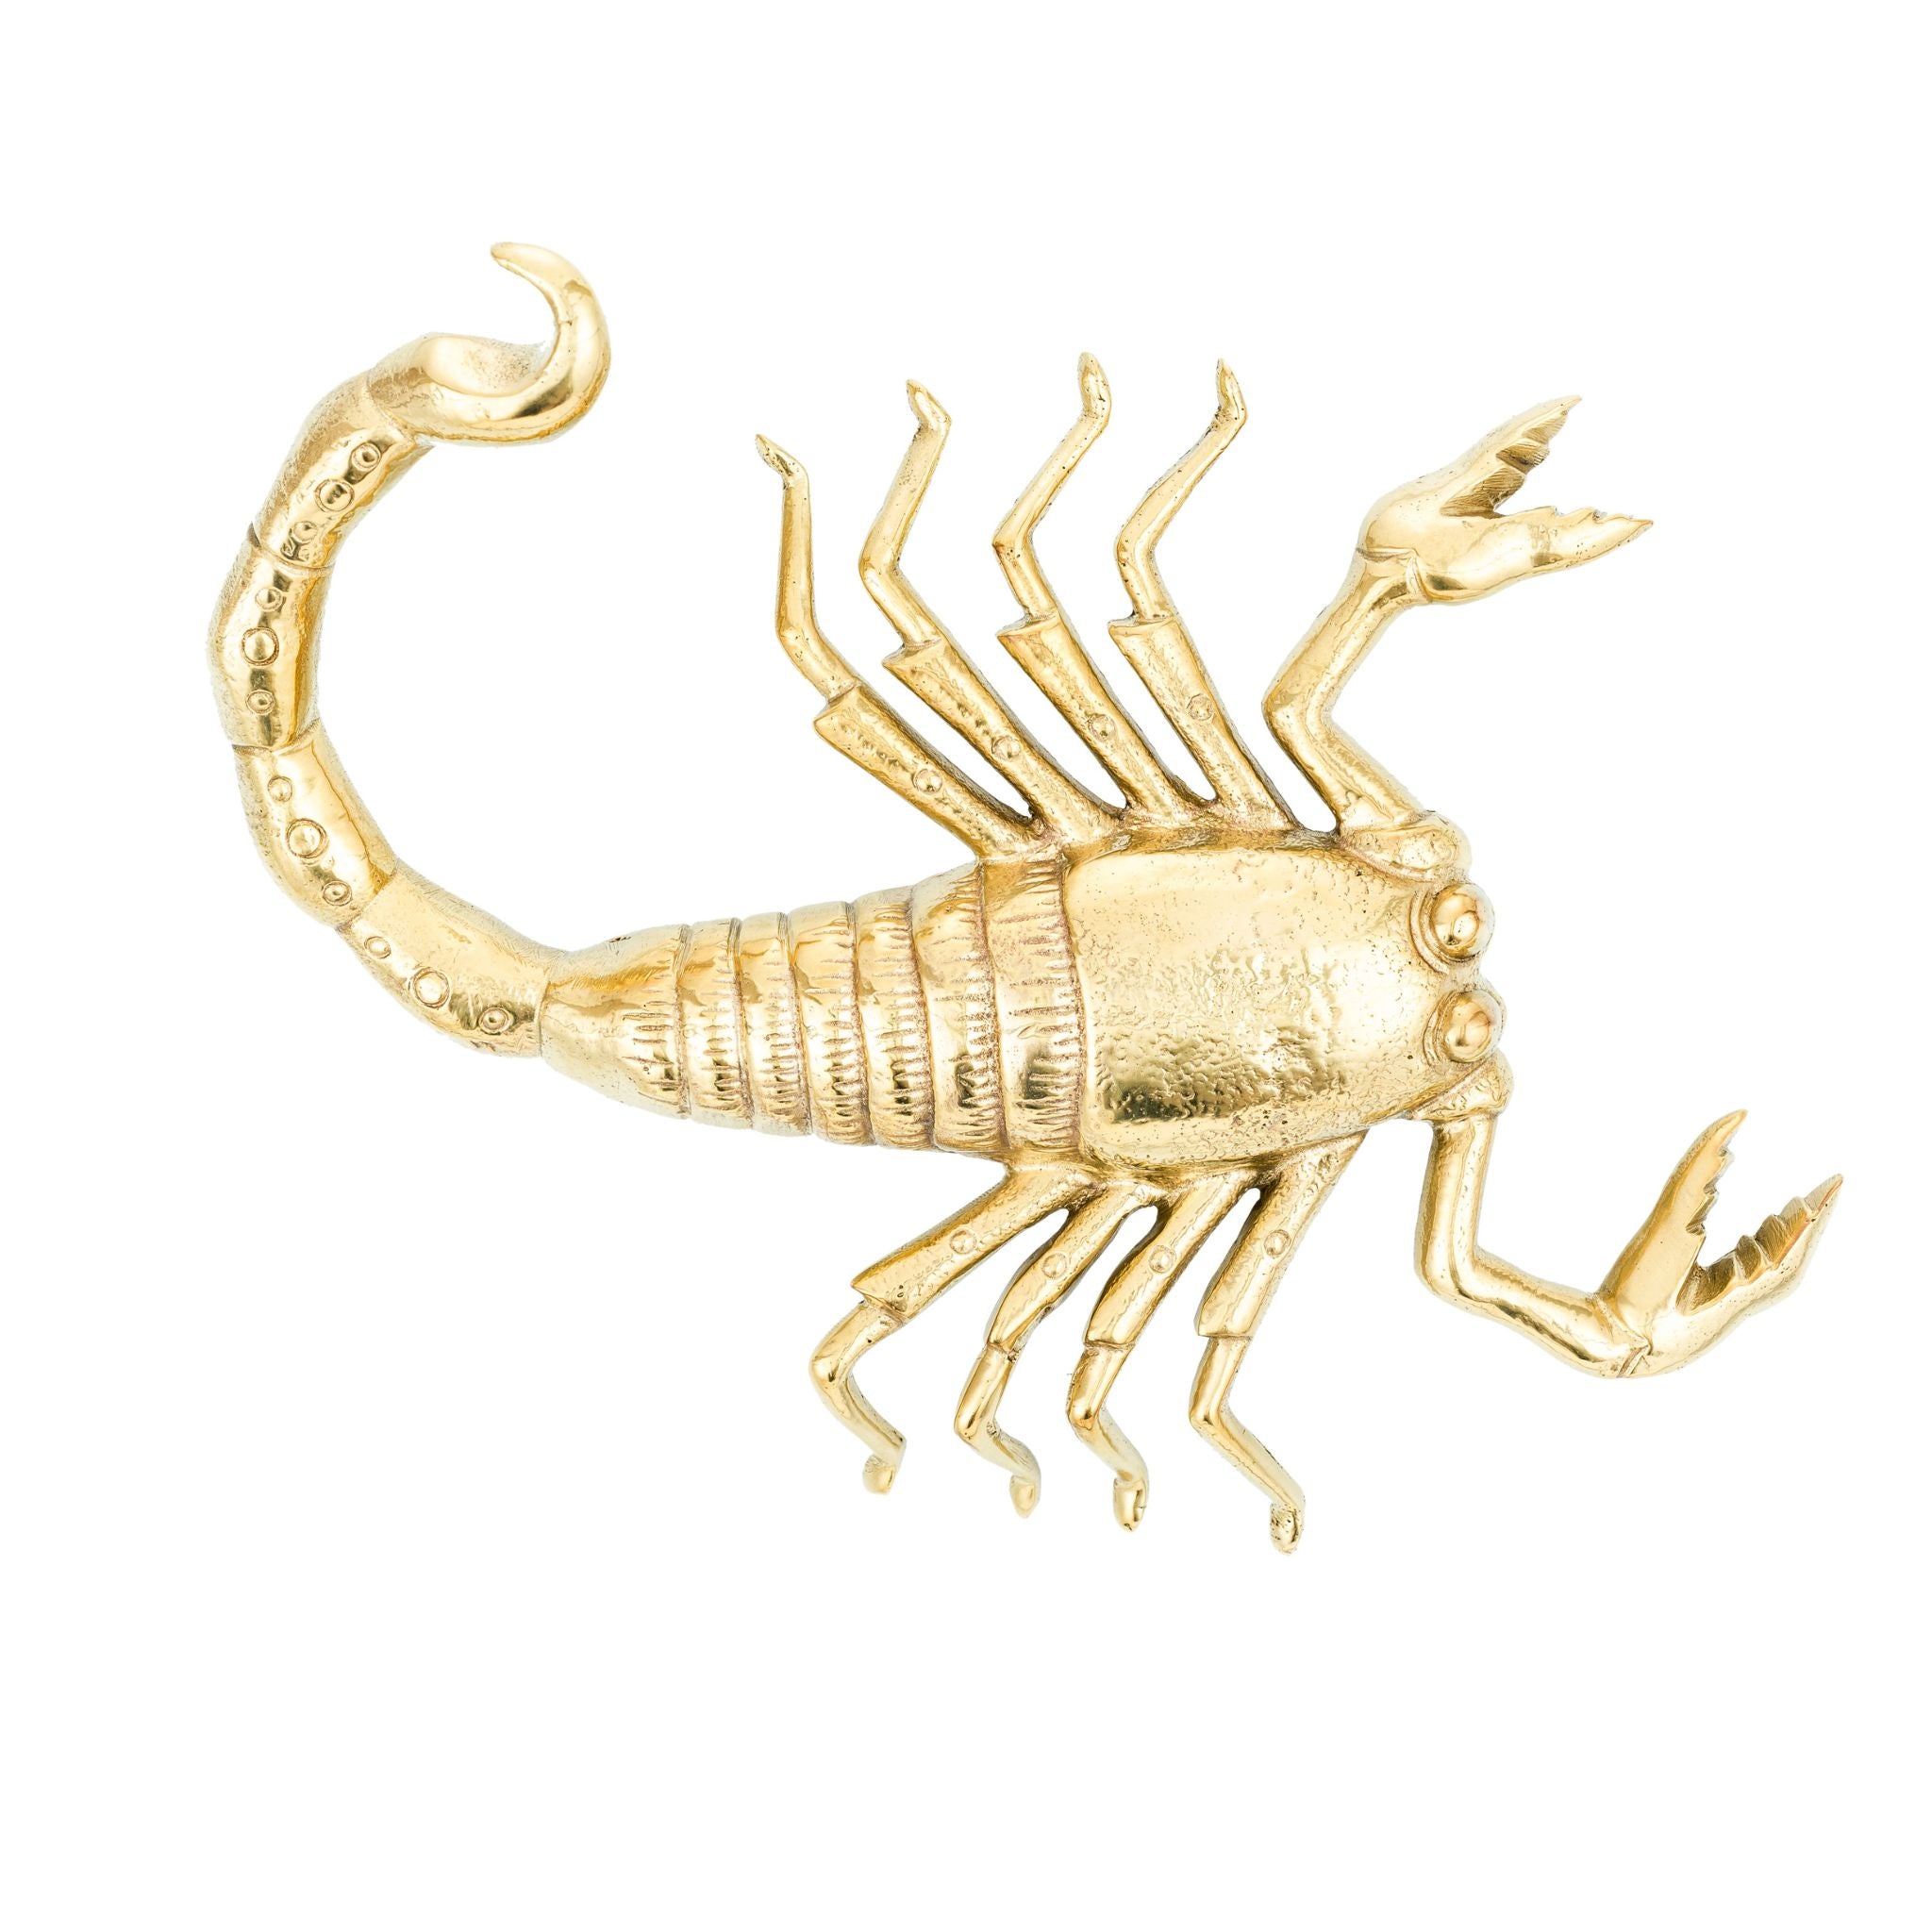 An image of a brass scorpion-shaped knob against a neutral background. The knob features intricate detailing resembling a scorpion's body and pincers, adding a touch of boldness and intrigue to furniture or drawers.